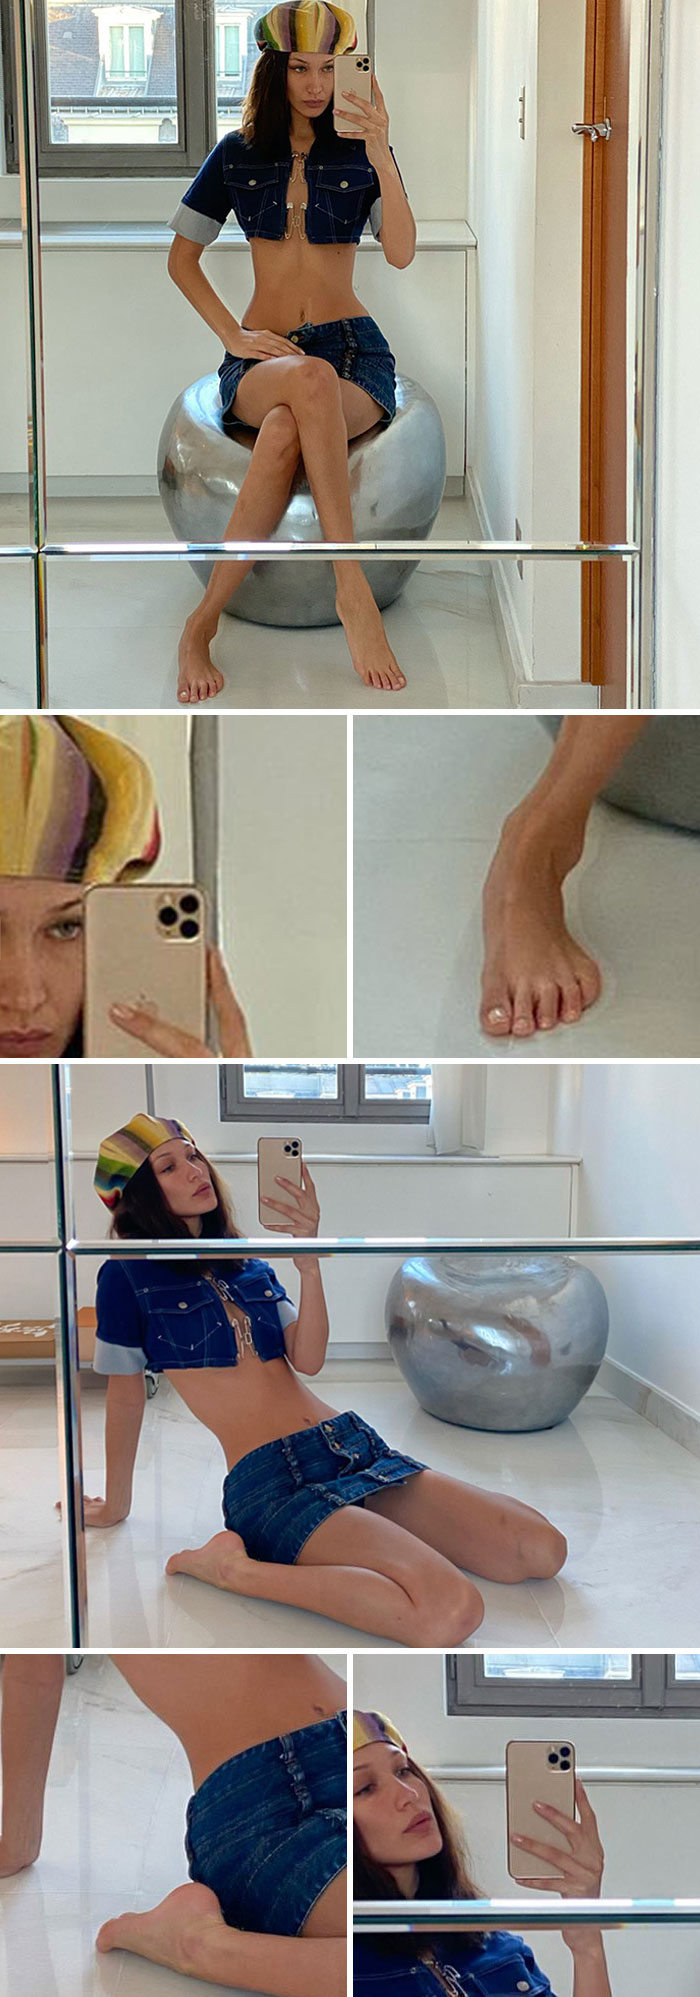 Bella Hadid Was Accused Of Editing Her Pictures (Shelf Bending In A Different Direction, The Reflection Of The Mirror Is Wonky)